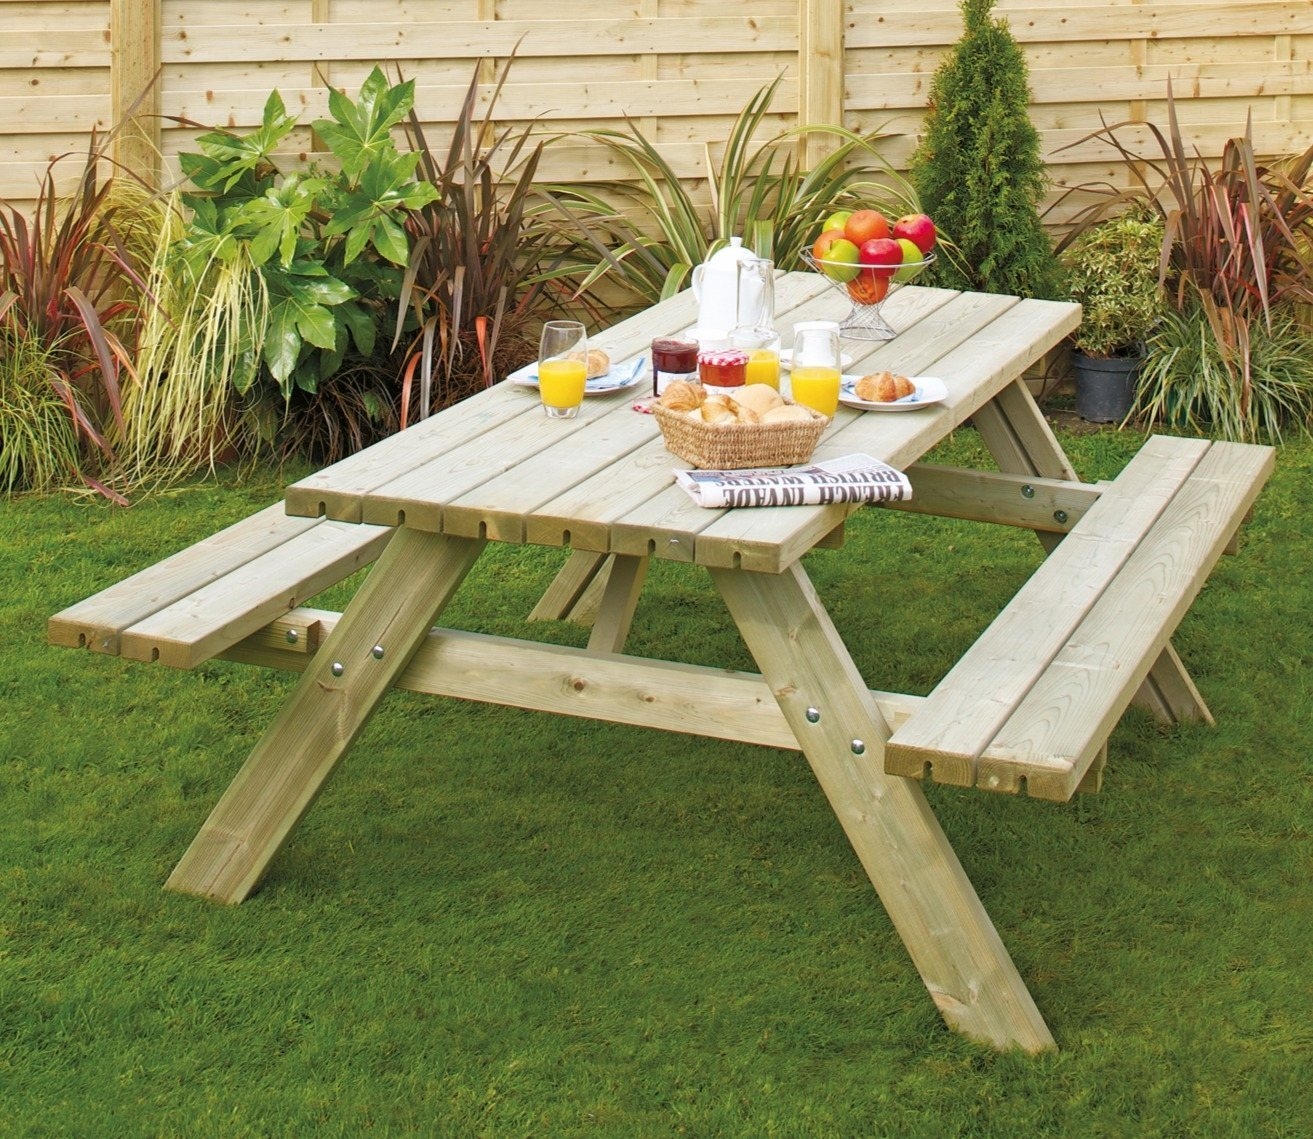 Wooden Oblong Picnic Table with folding seats